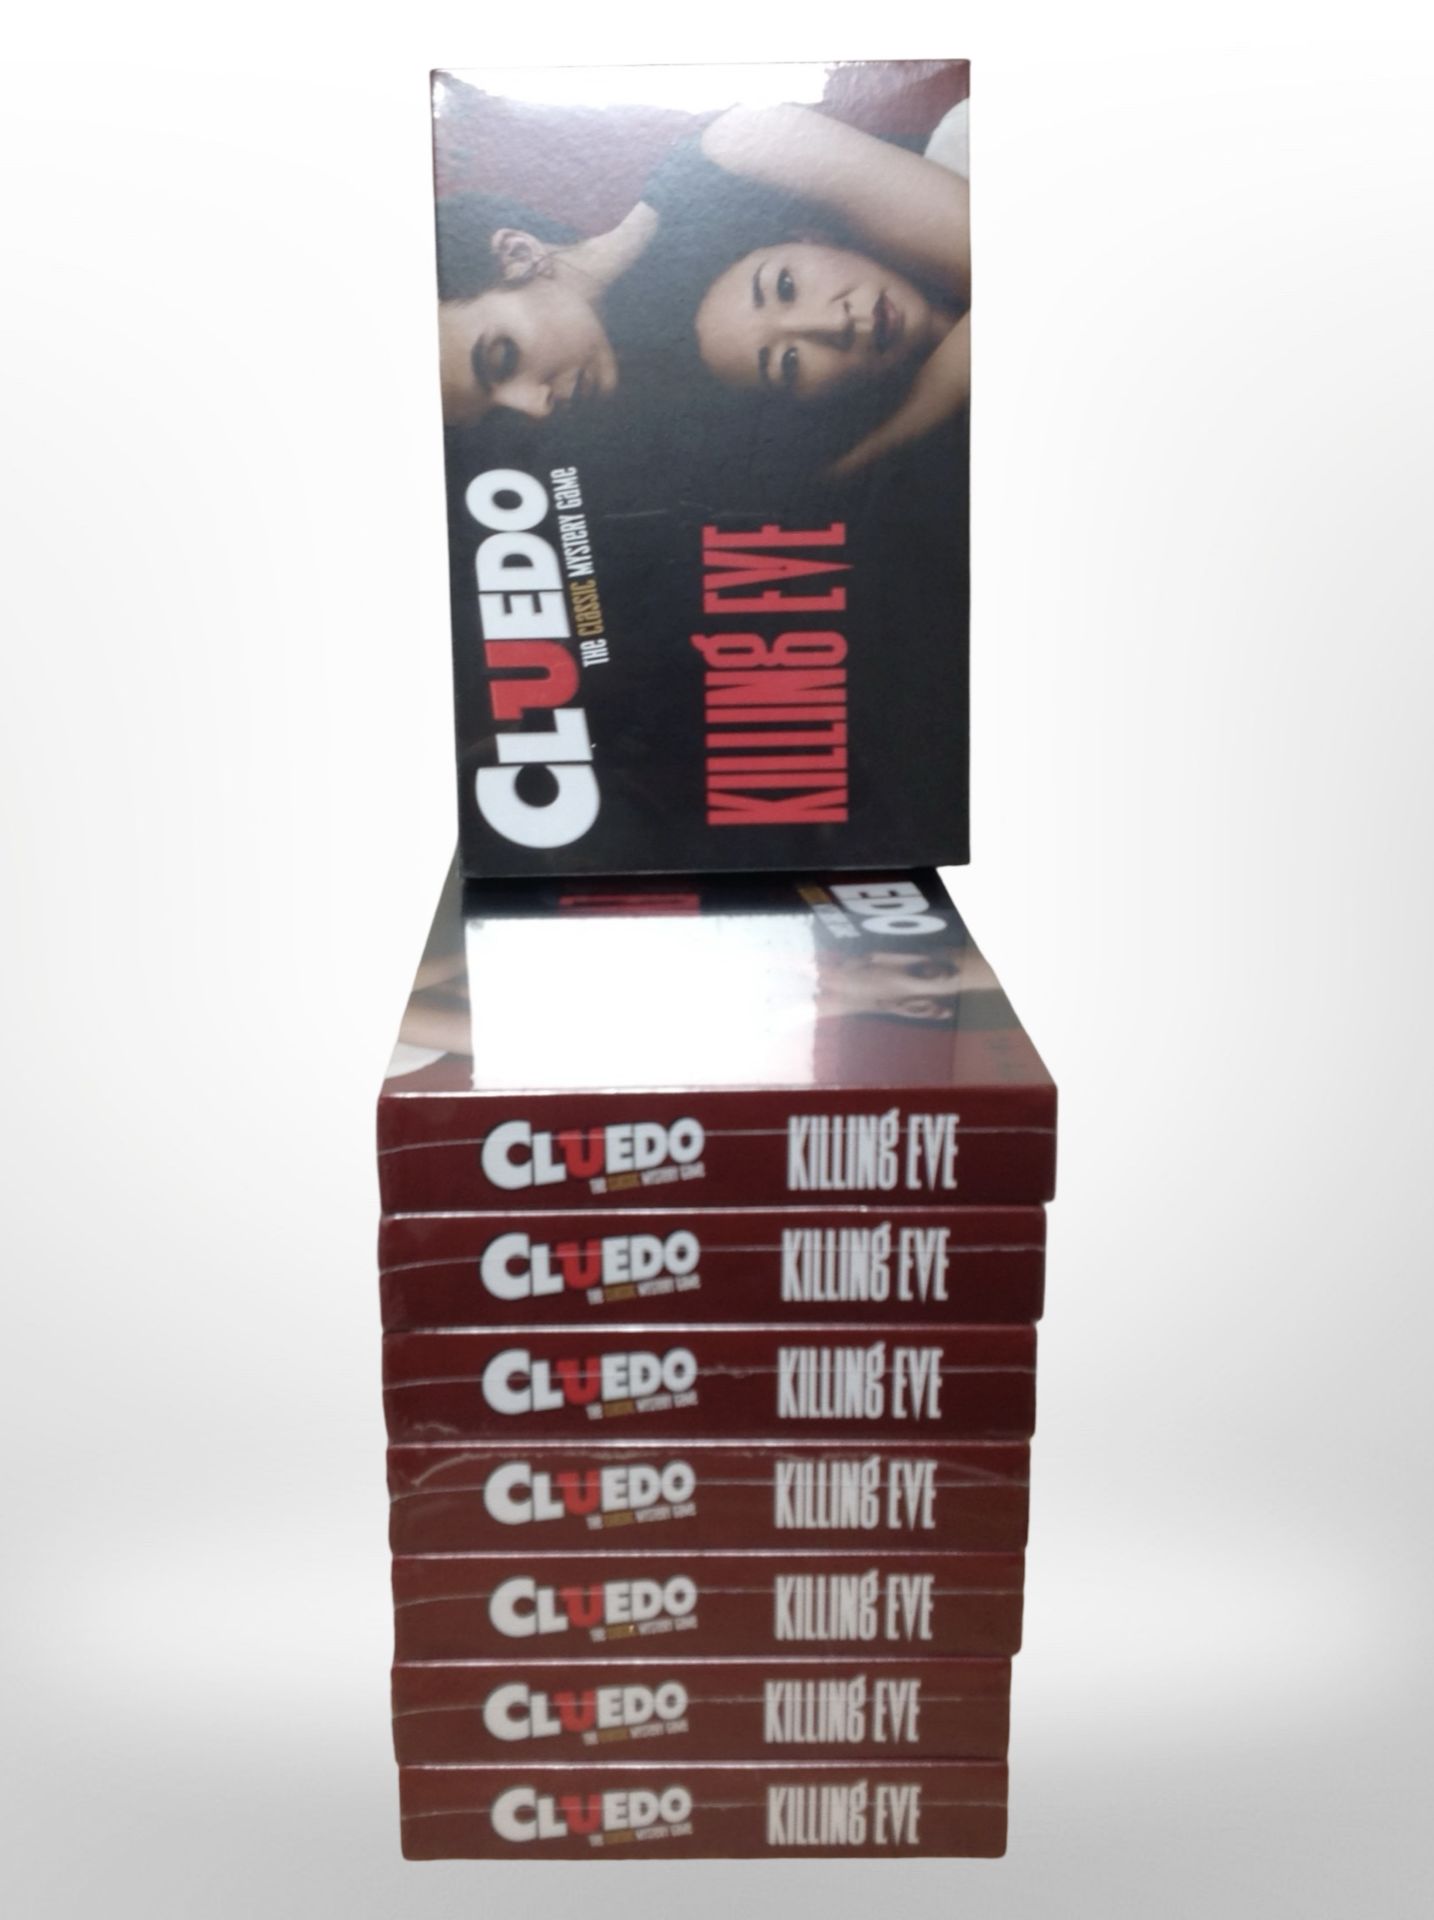 Eight Cluedo Killing Eve Edition board games, all sealed in cellophane.